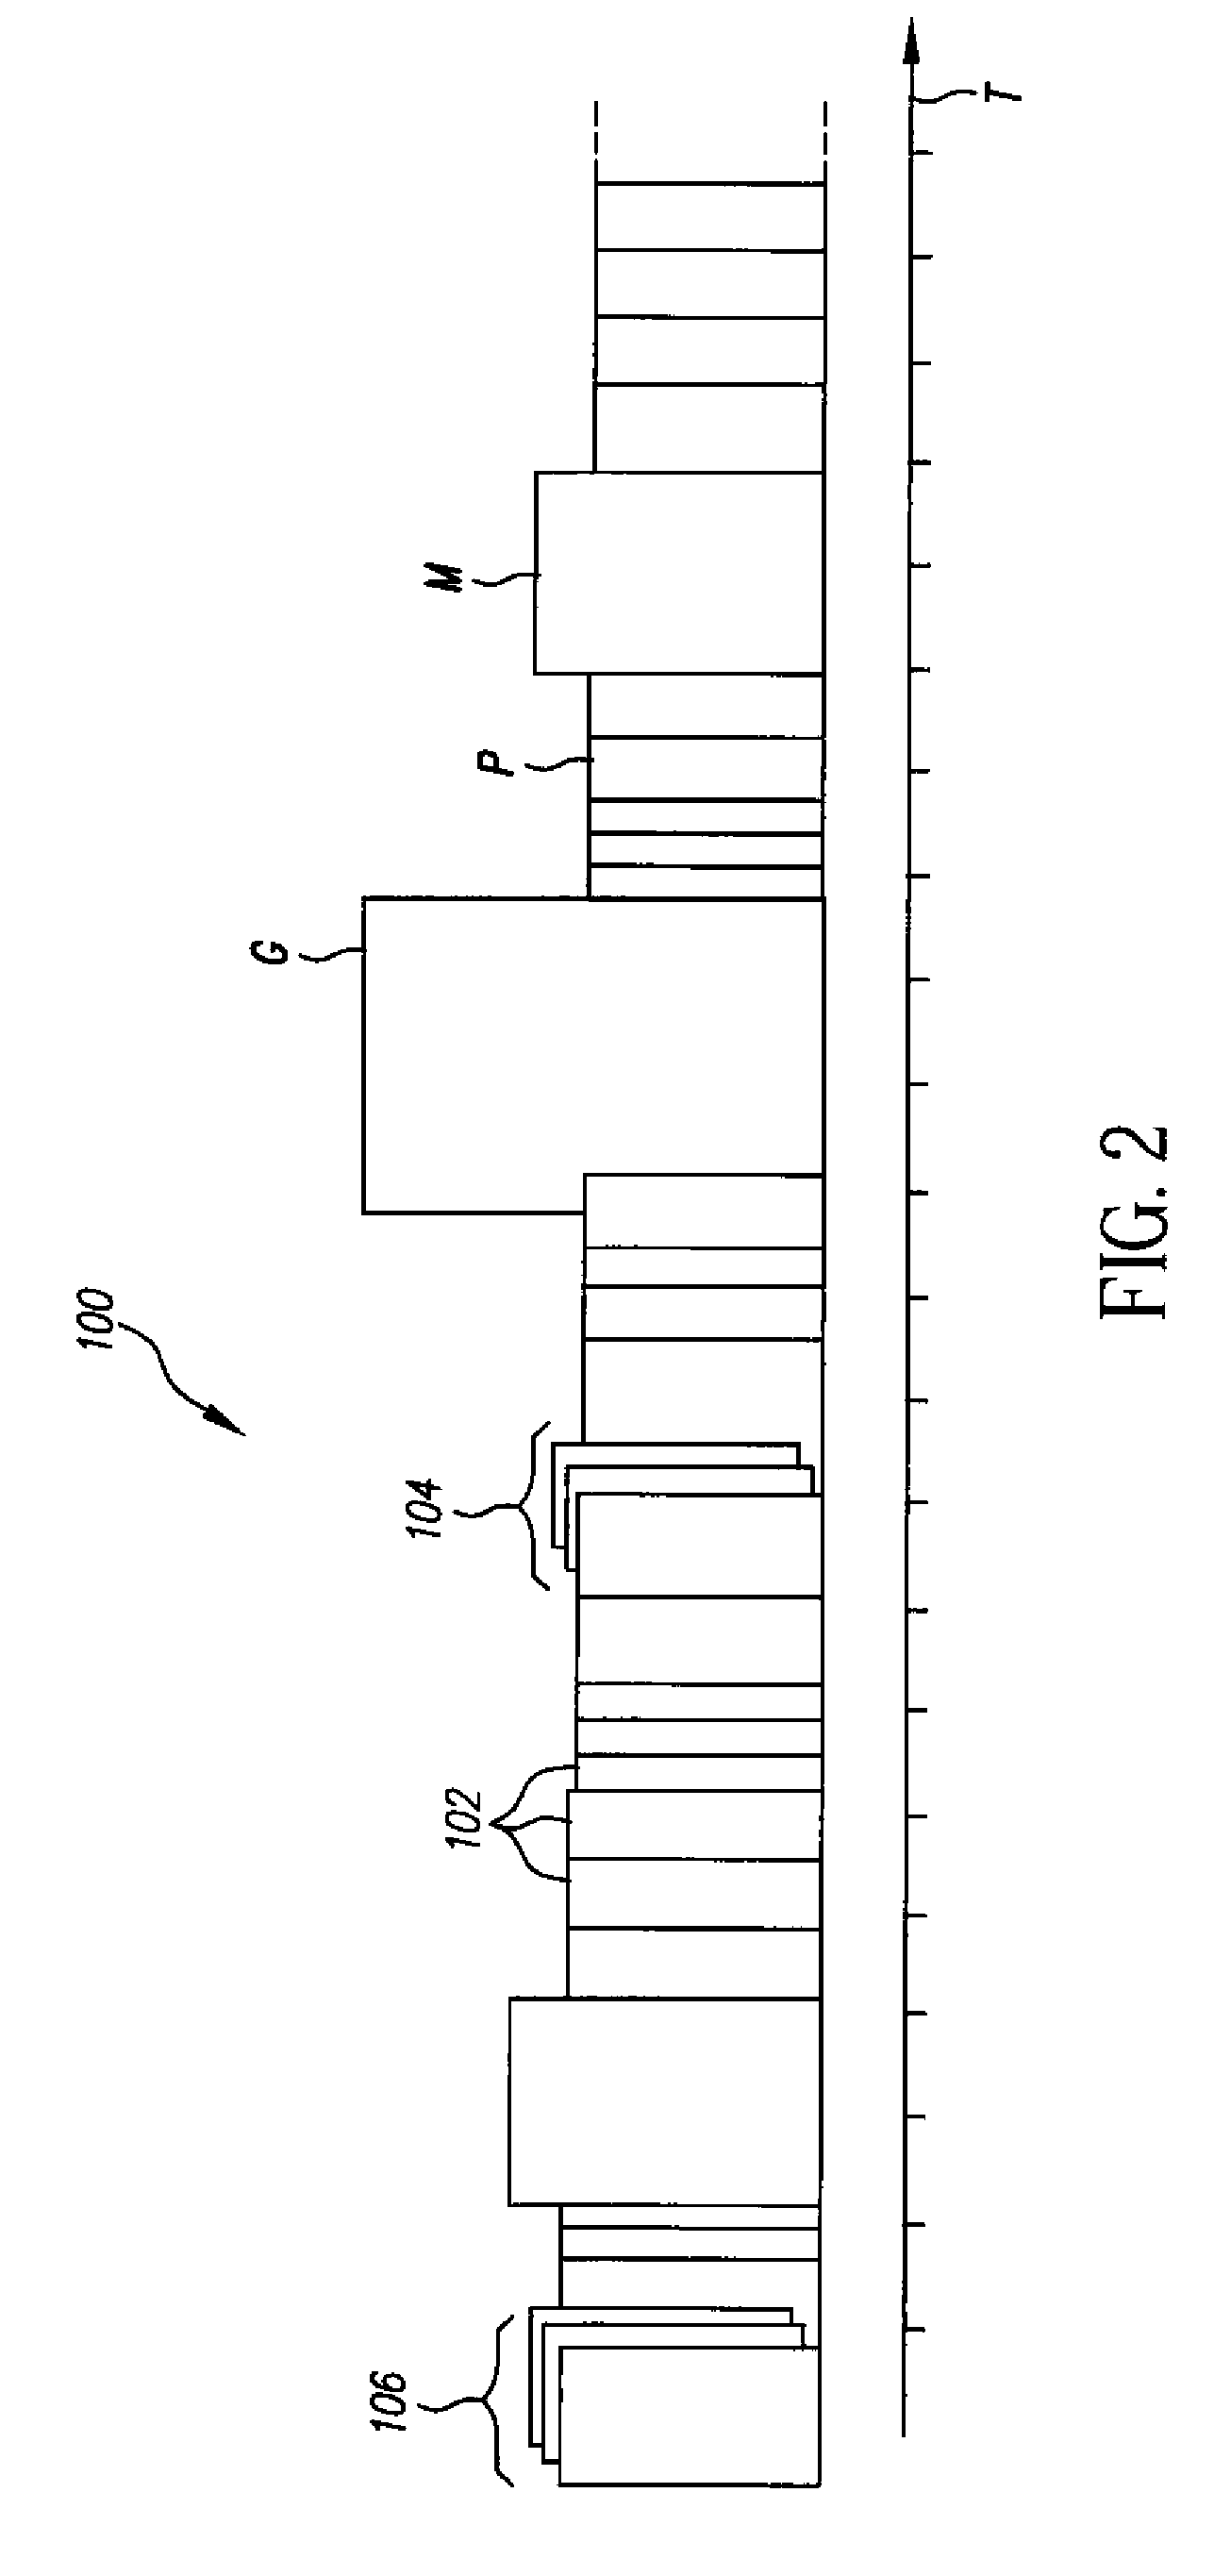 Variable-speed browsing method for digital images